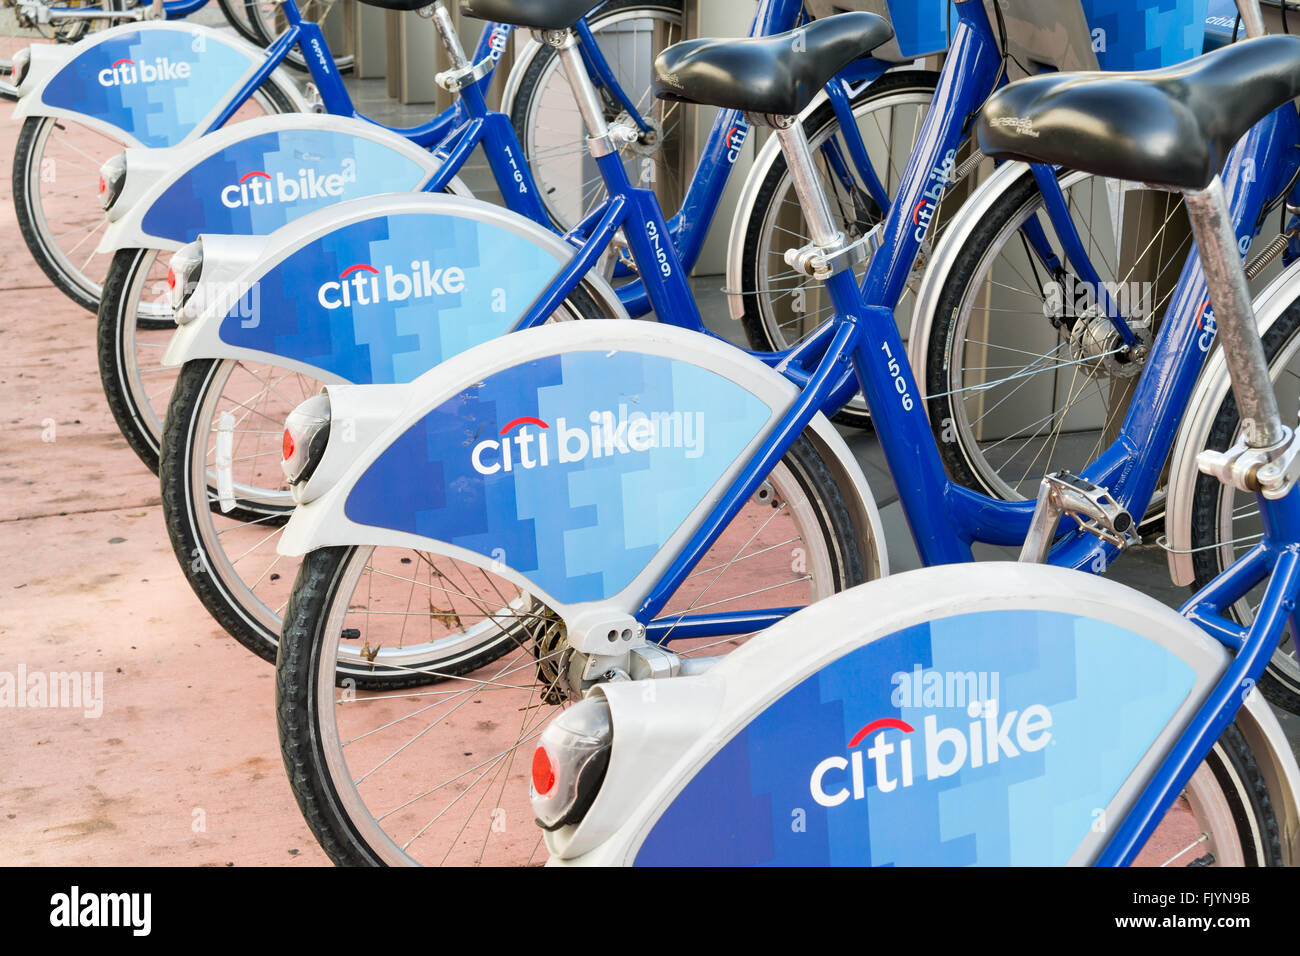 Bicycles parked in a row at city bike station in South Beach district of Miami Beach, Florida, USA Stock Photo